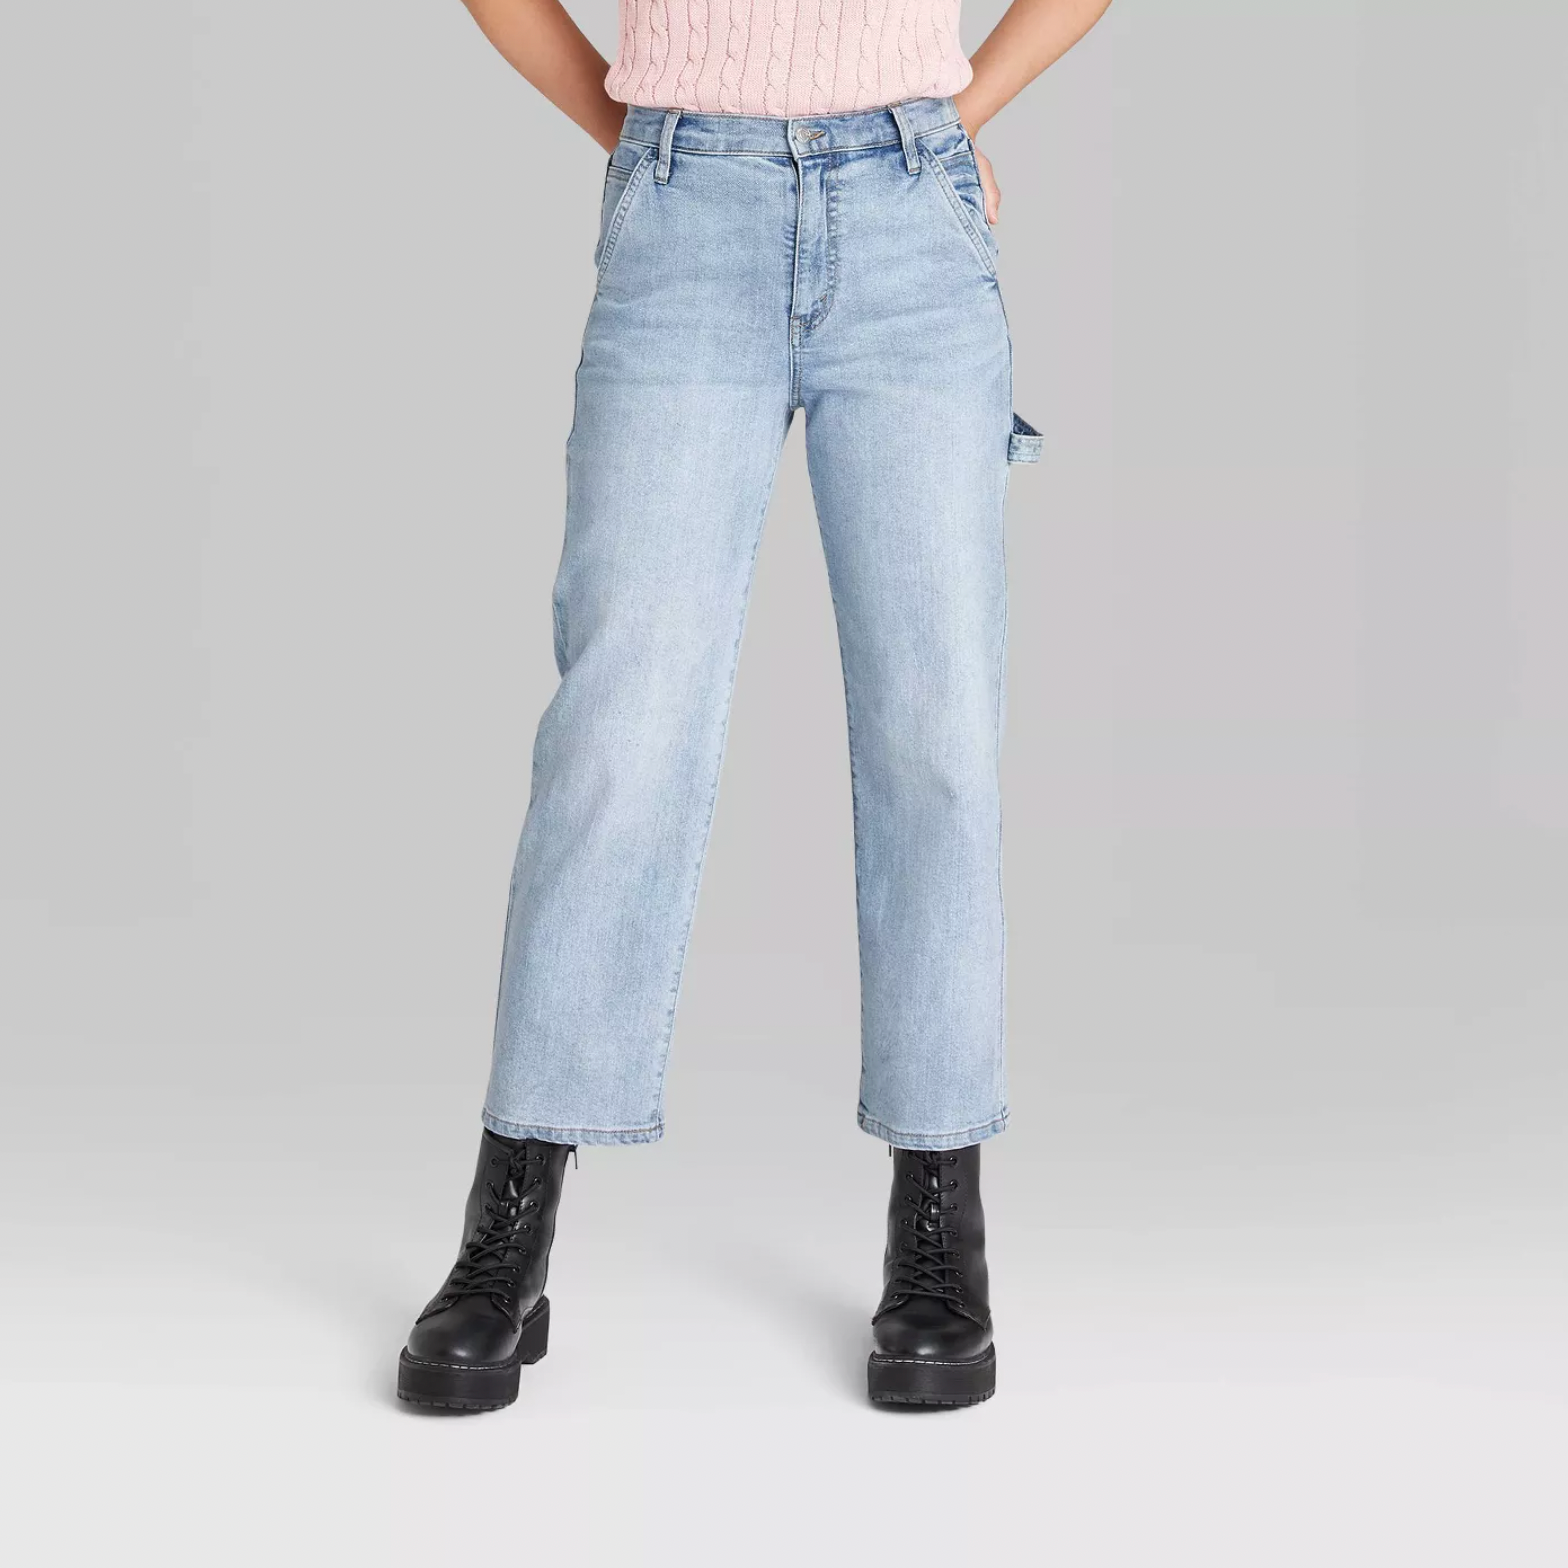 These $25 Jeans From Target Are Getting So Much Love on TikTok